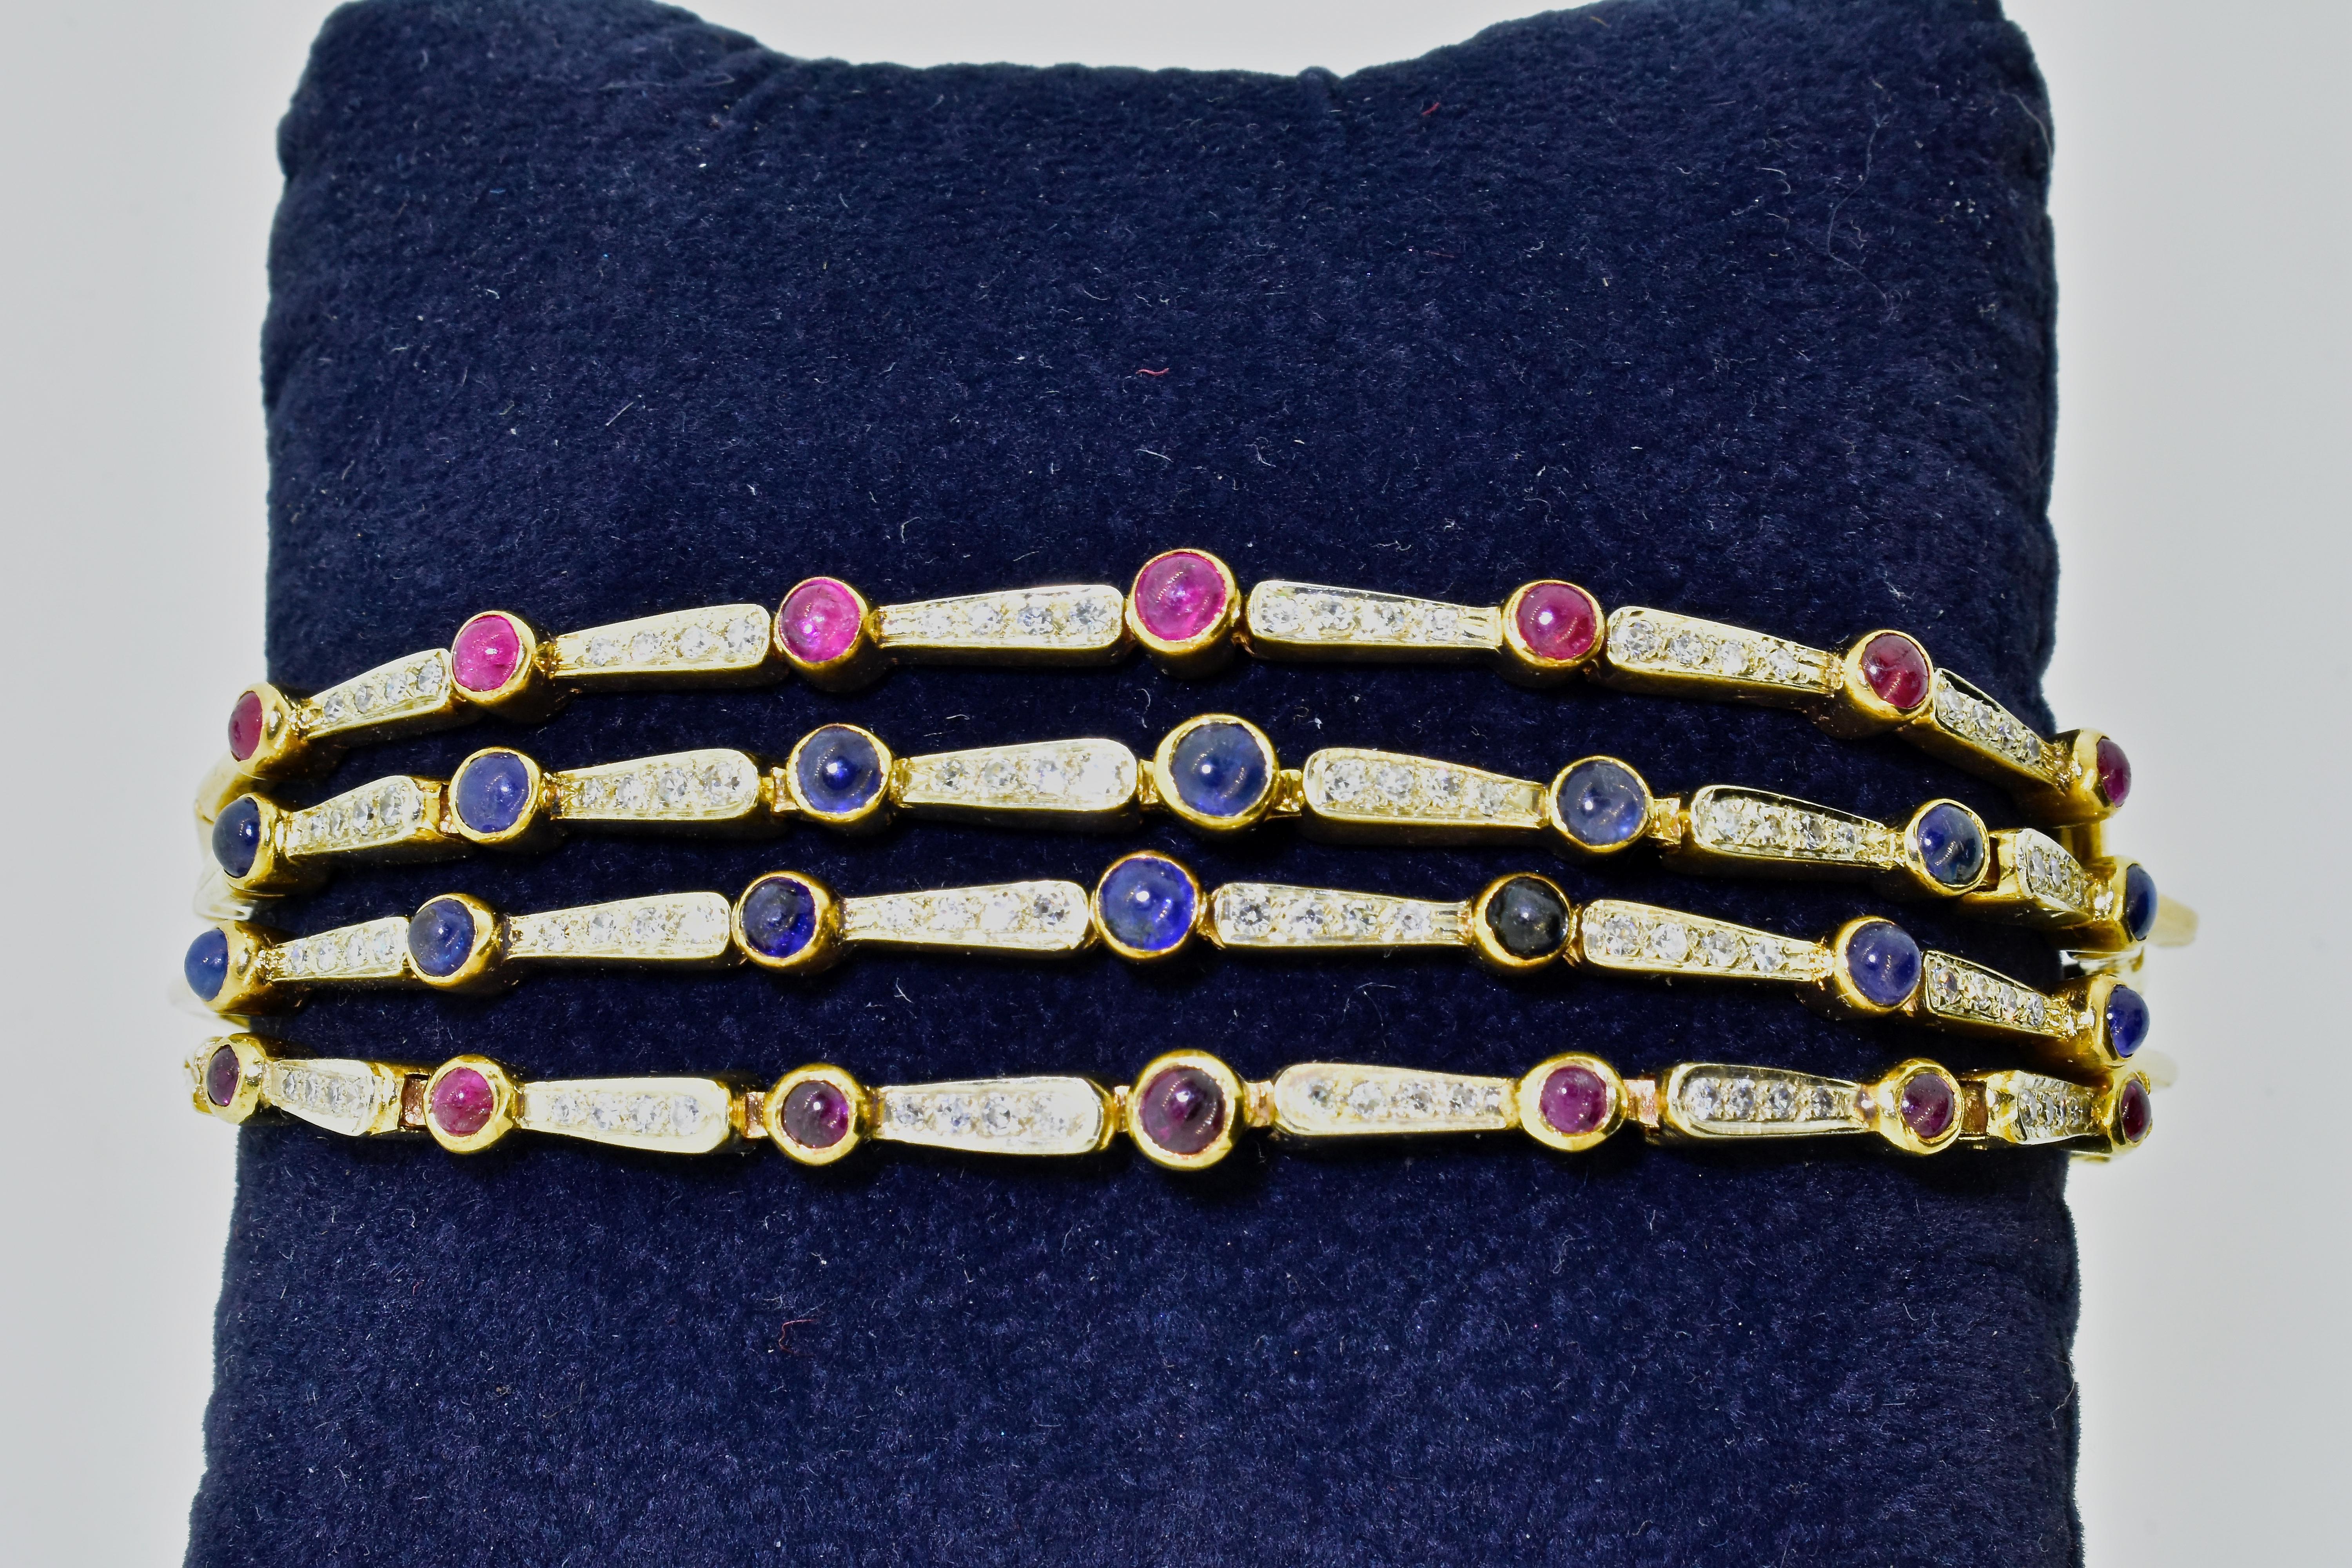 Sapphire, ruby and diamond flexible gold bracelet  with 14 natural fine blue sapphires and 14 natural fine bright red rubies, cut en cabochon.  There are 1.6 cts of rubies and 1.6 cts. of sapphires.  These colored stones are well matched in color